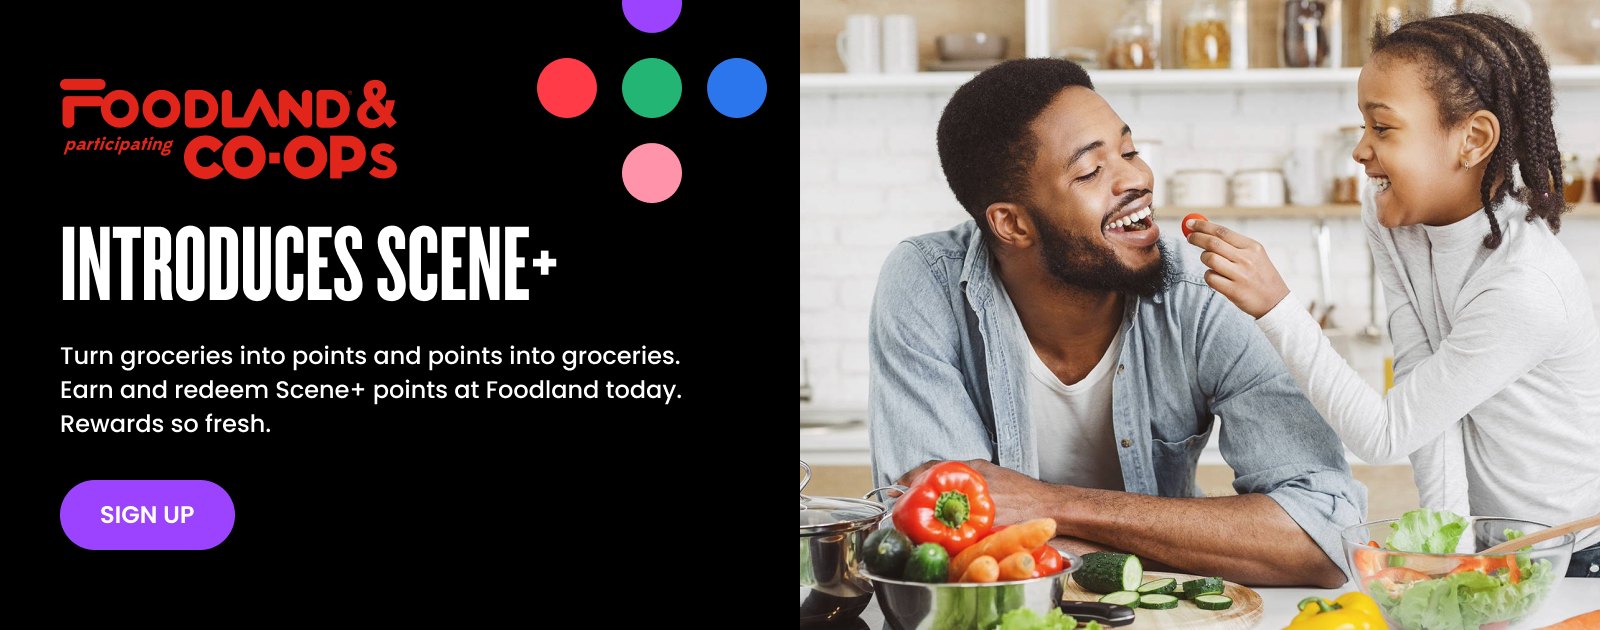 Text Reading 'Foodland & participating Co-ops introduces Scene+ Turn purchases into points and points into purchases. Earn and redeem Scene+ points at Foodland today. Rewards so fresh. Press 'Sign Up' button to avail benefits on ELM'.